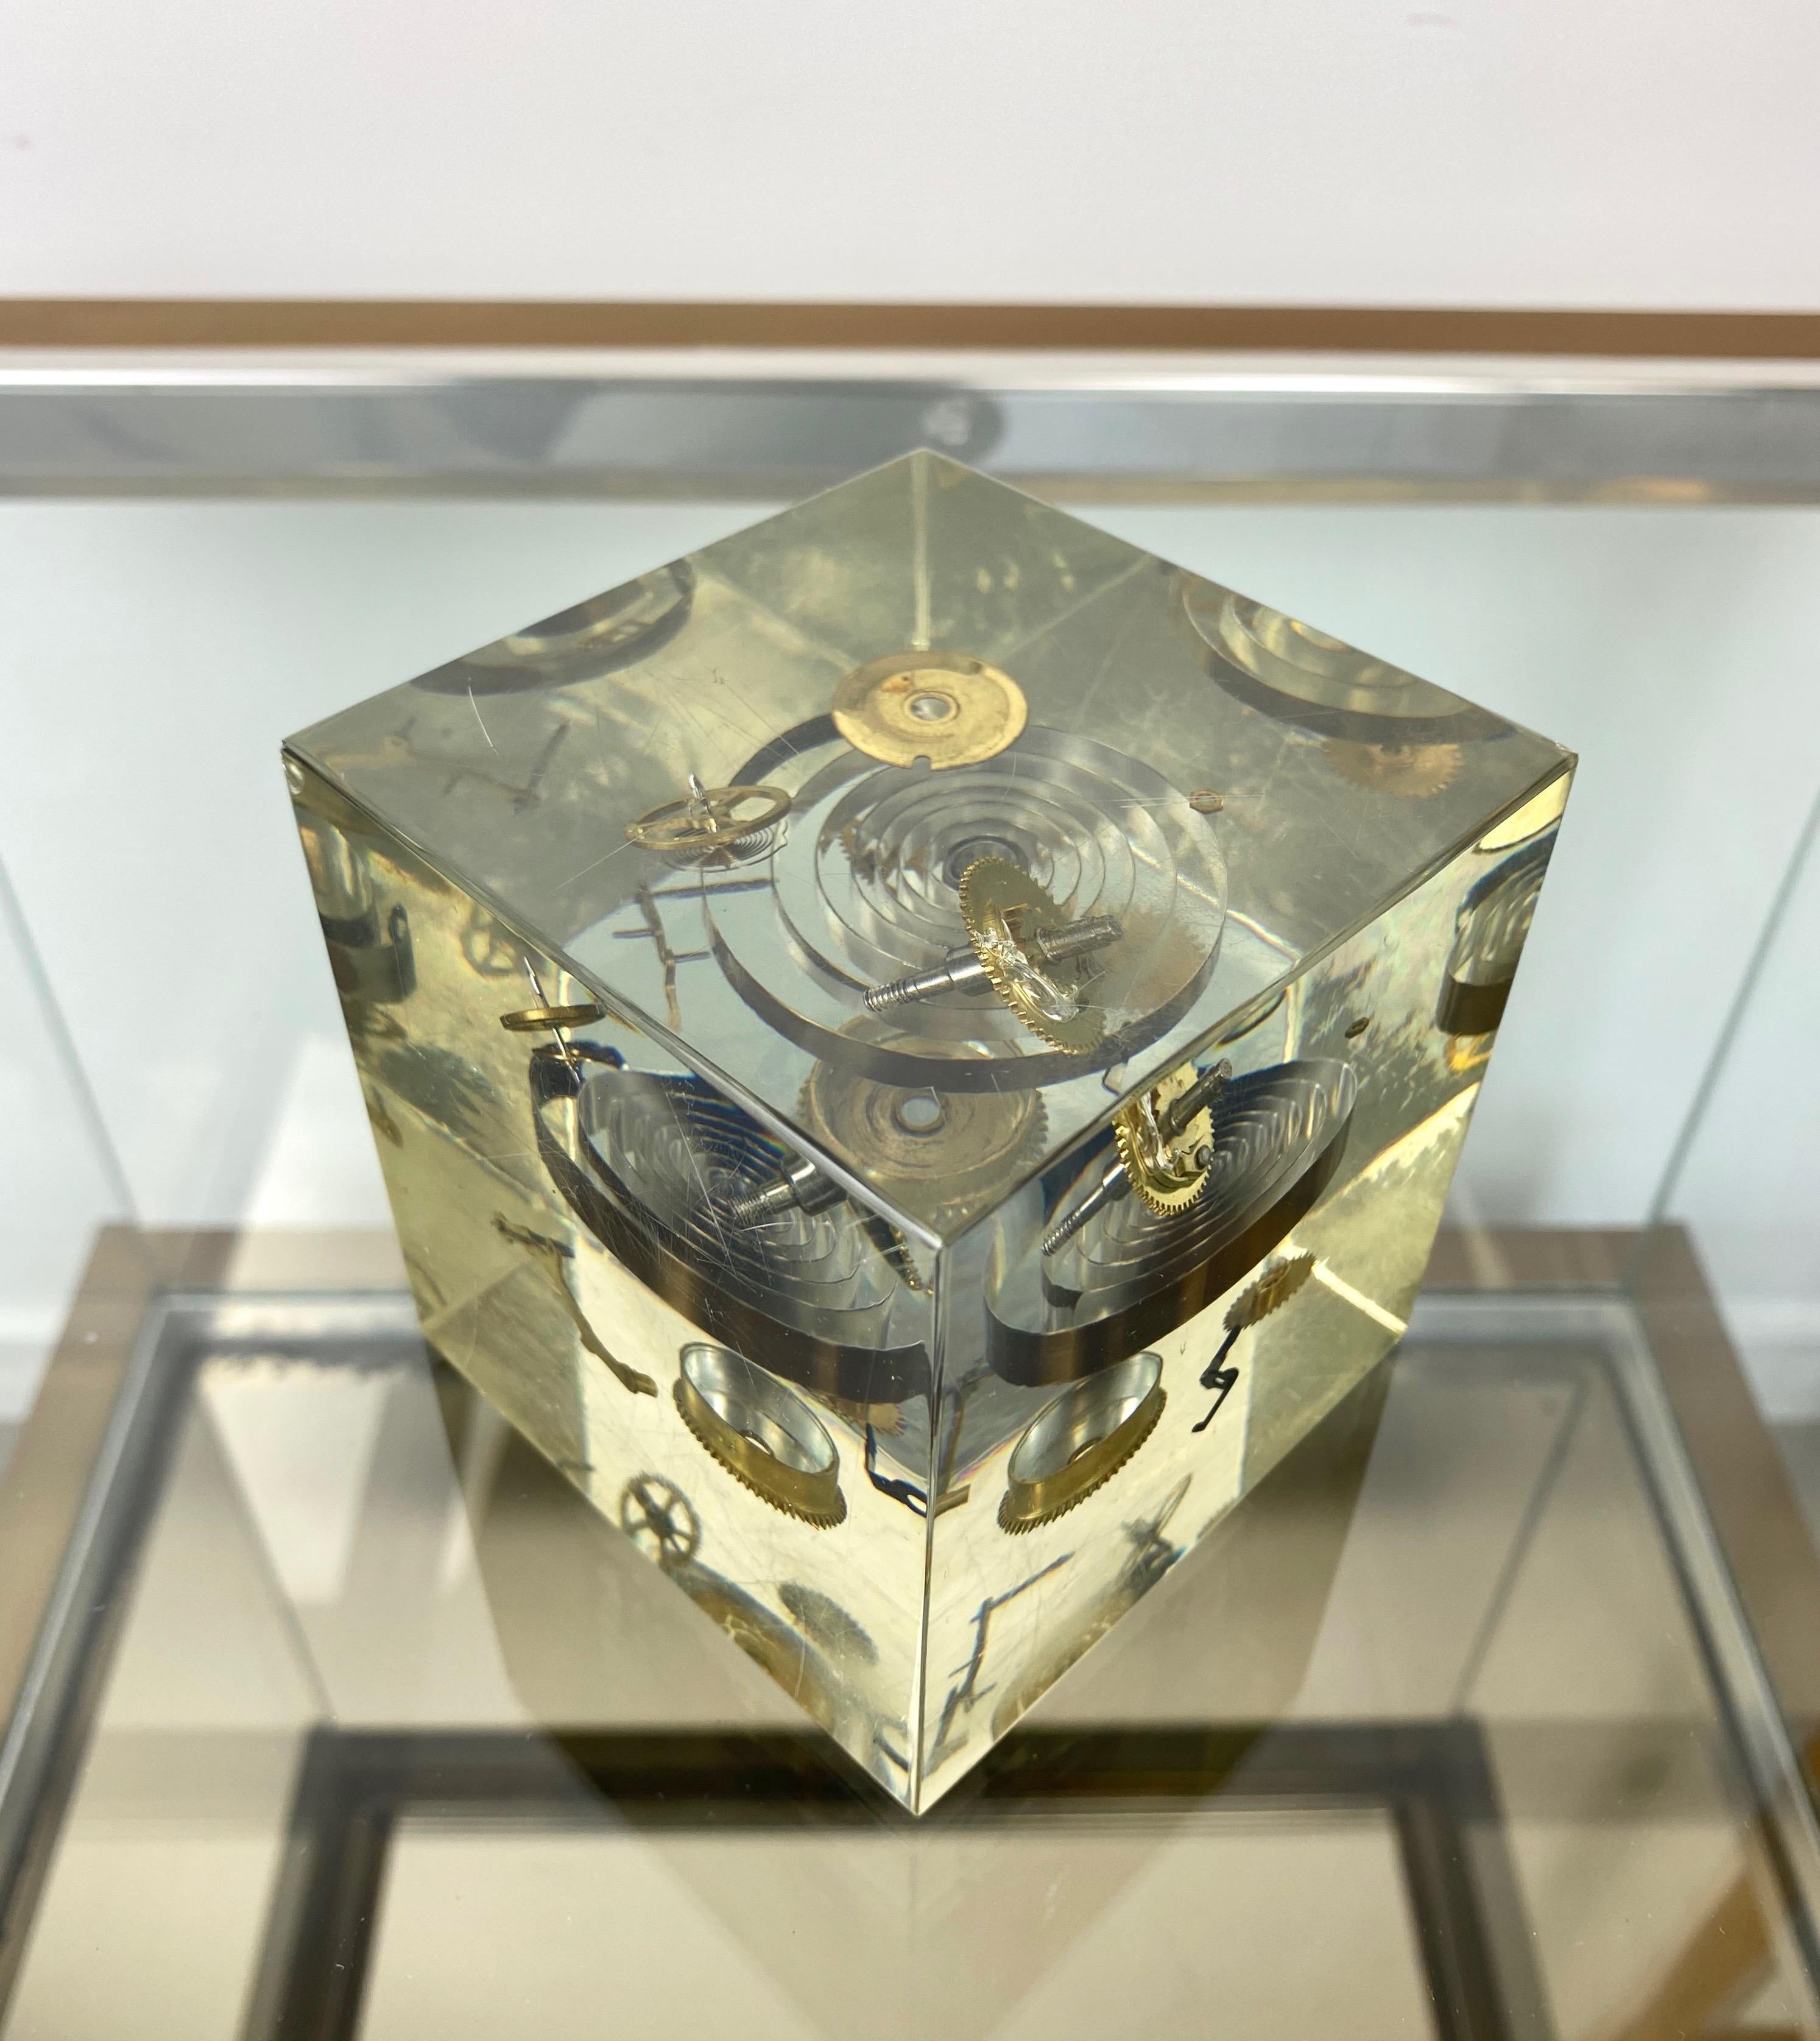 Acrylic Cube Sculpture Paperweight with Clock Parts by Pierre Giraudon, 1970s For Sale 1